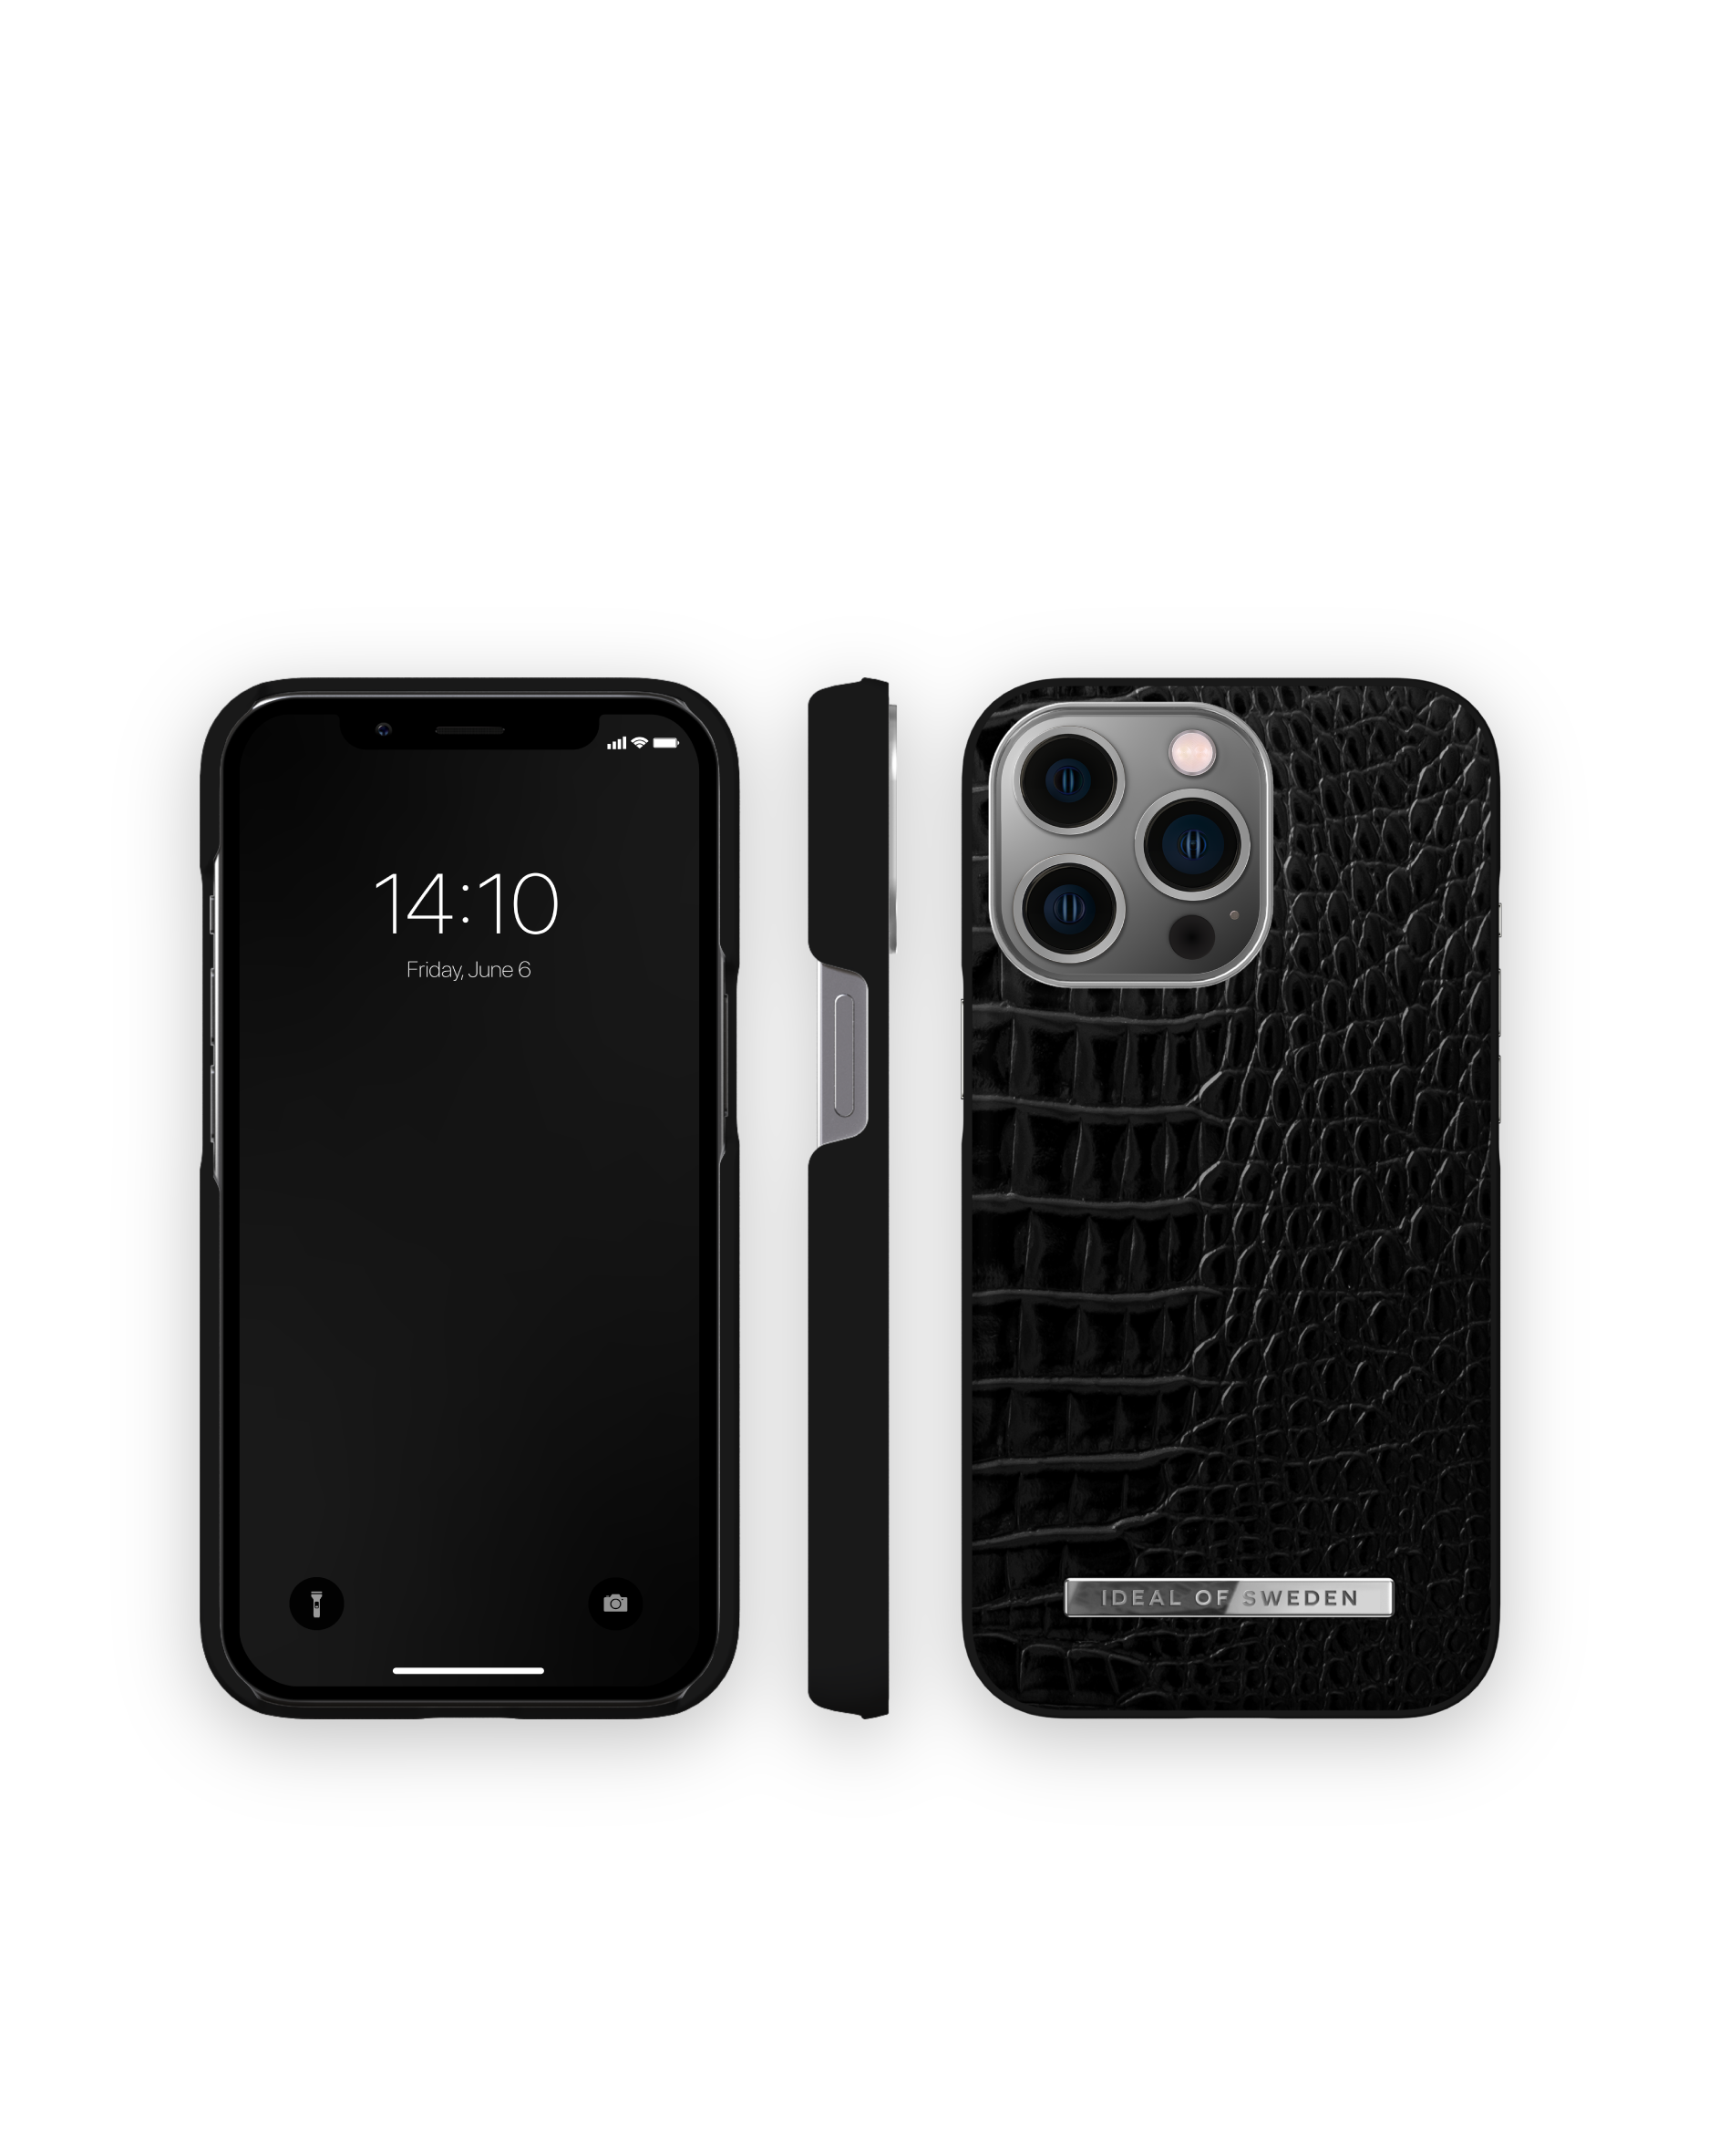 OF Silver Croco IDEAL Neo Pro, Apple, iPhone IDACSS21-I2161P-306, 13 Backcover, SWEDEN Noir